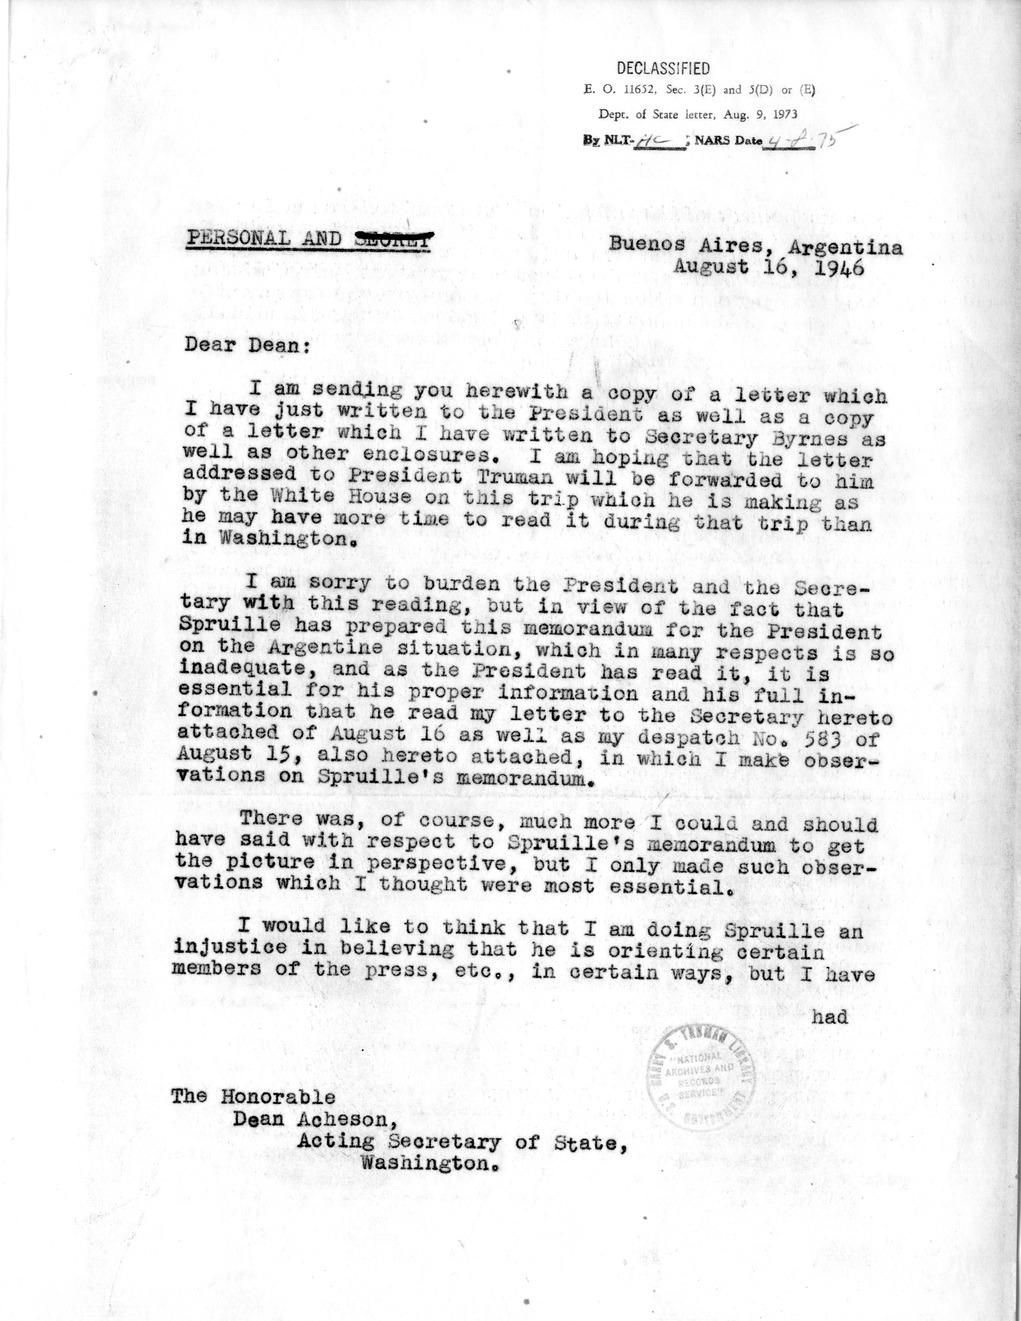 Memorandum from George Messersmith to President Harry S. Truman, with Attachment